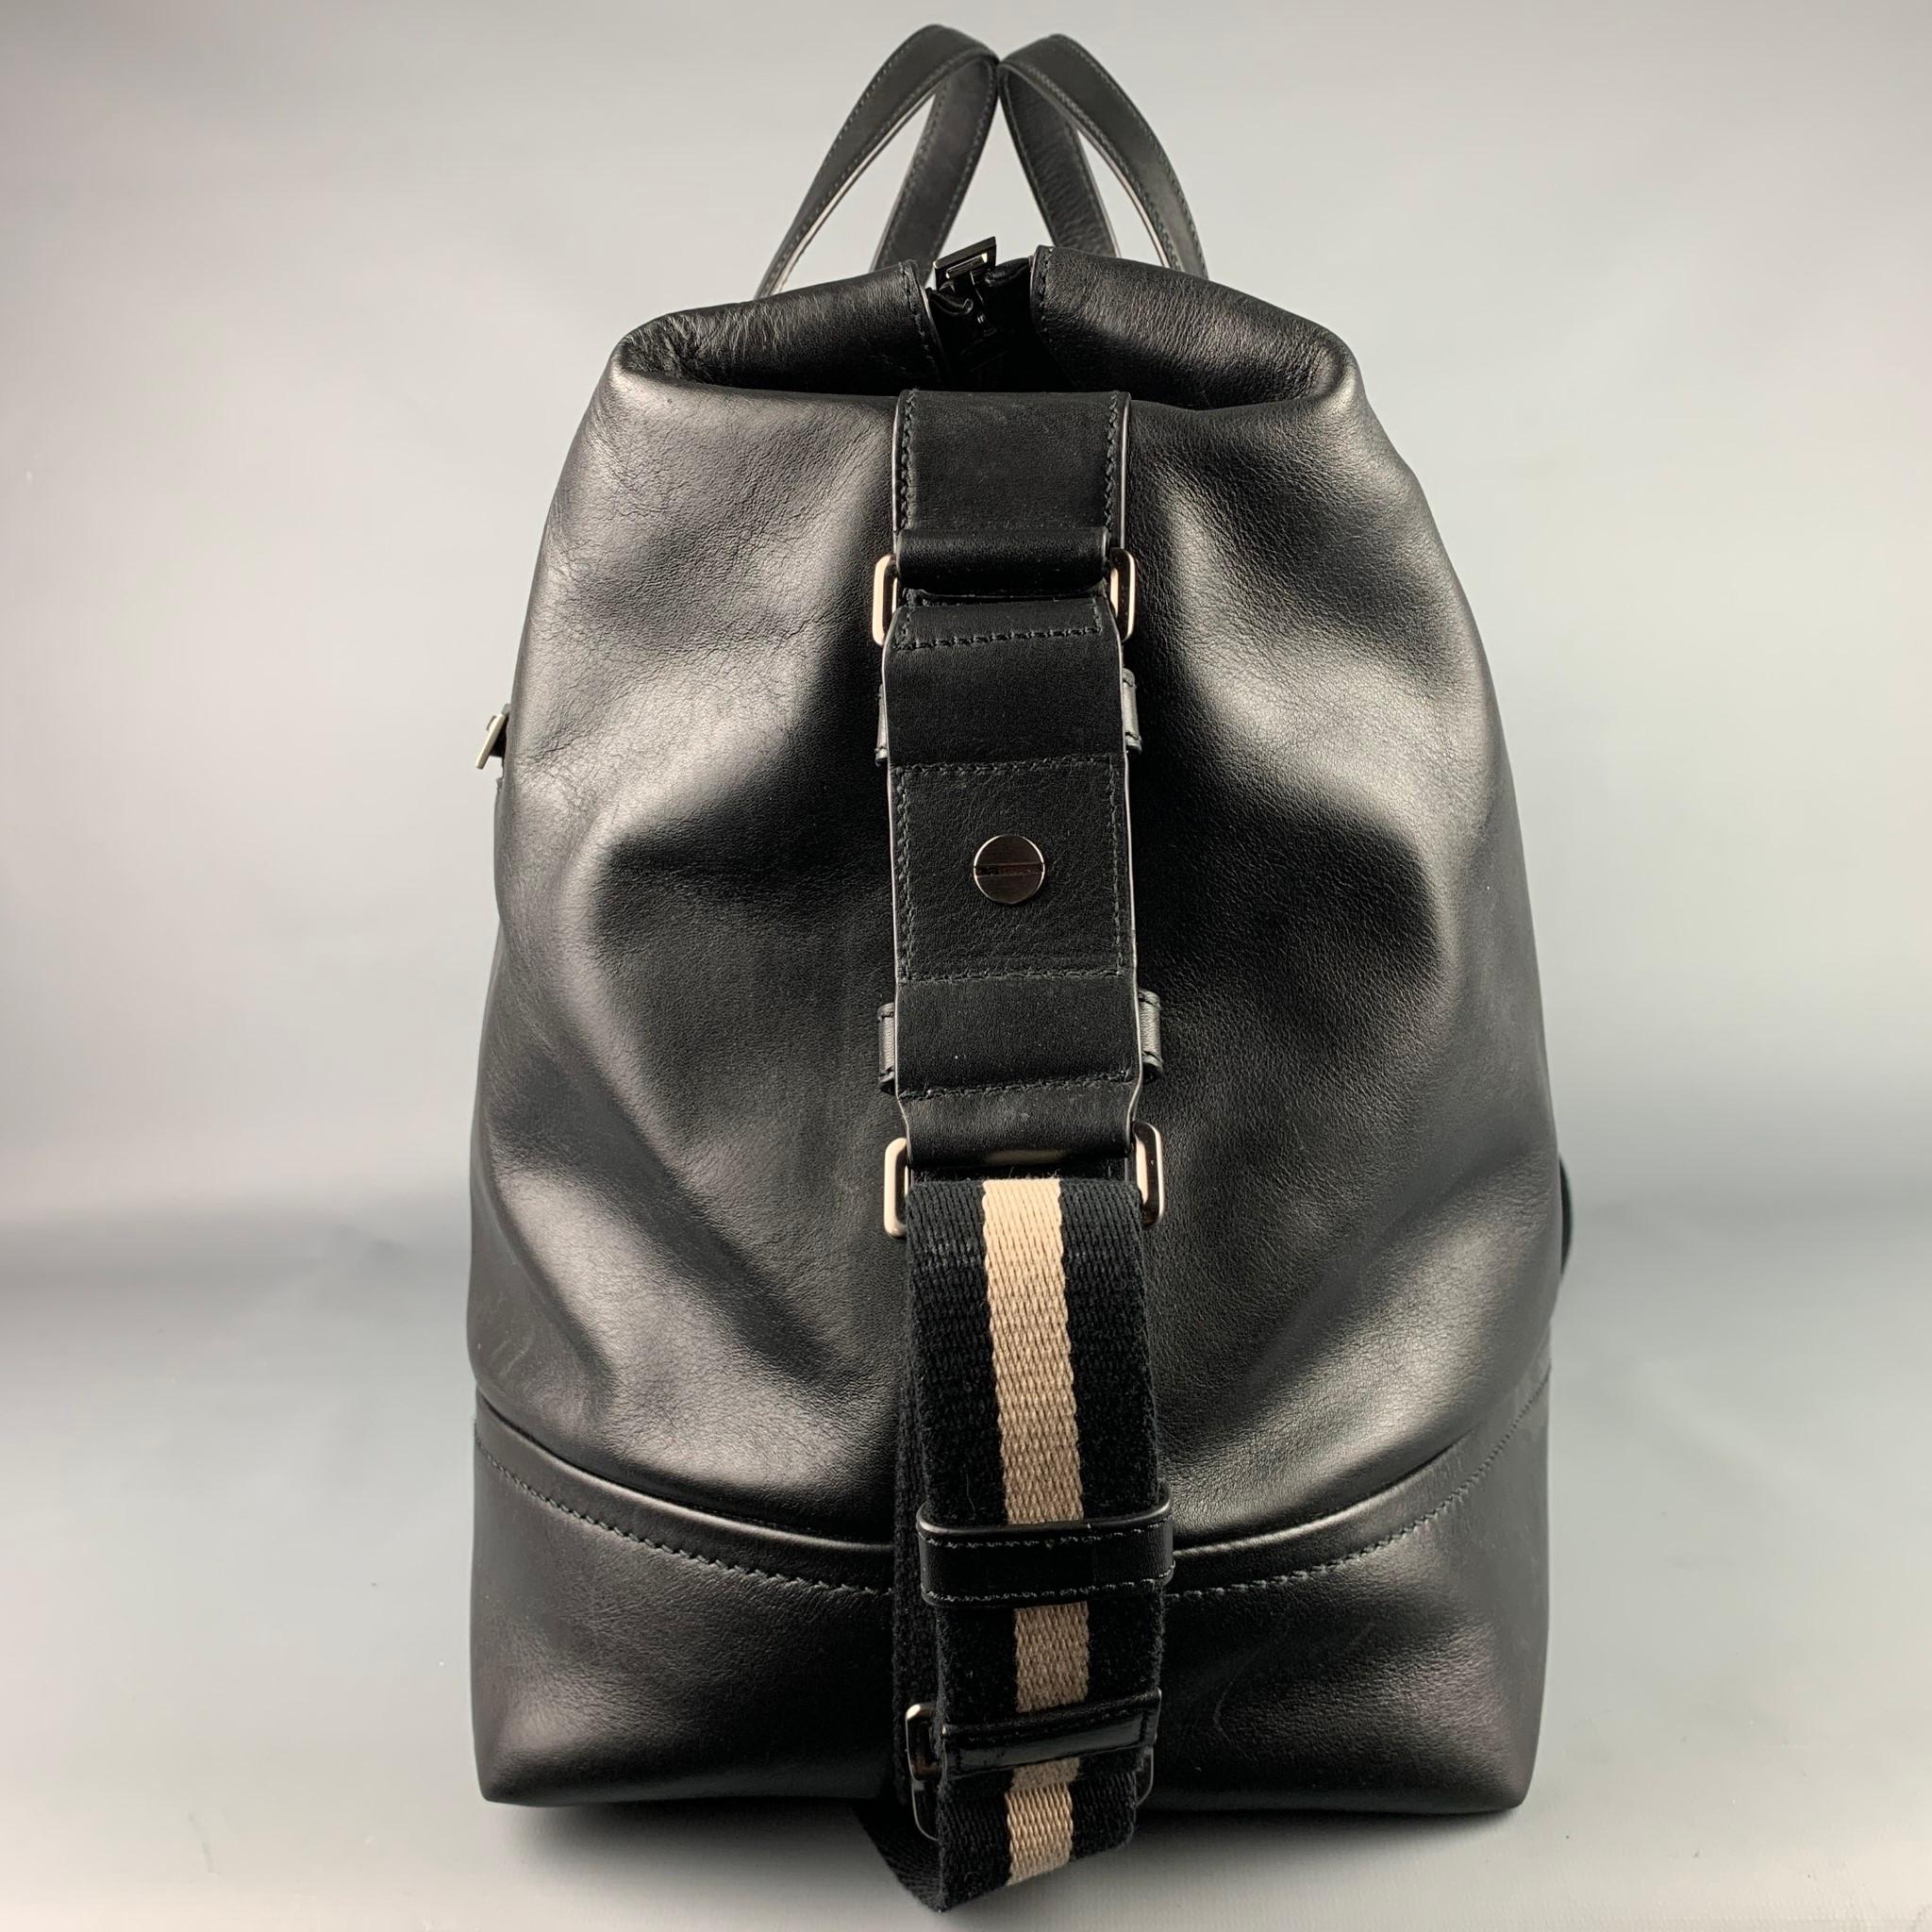 BALLY bag comes in a black leather featuring a duffle style, top handles, adjustable shoulder strap, front pocket, inner slots, and a zipper closure. 

Very Good Pre-Owned Condition.

Measurements:

Length: 19 in.
Width: 8.5 in.
Height: 12 in.
Drop: